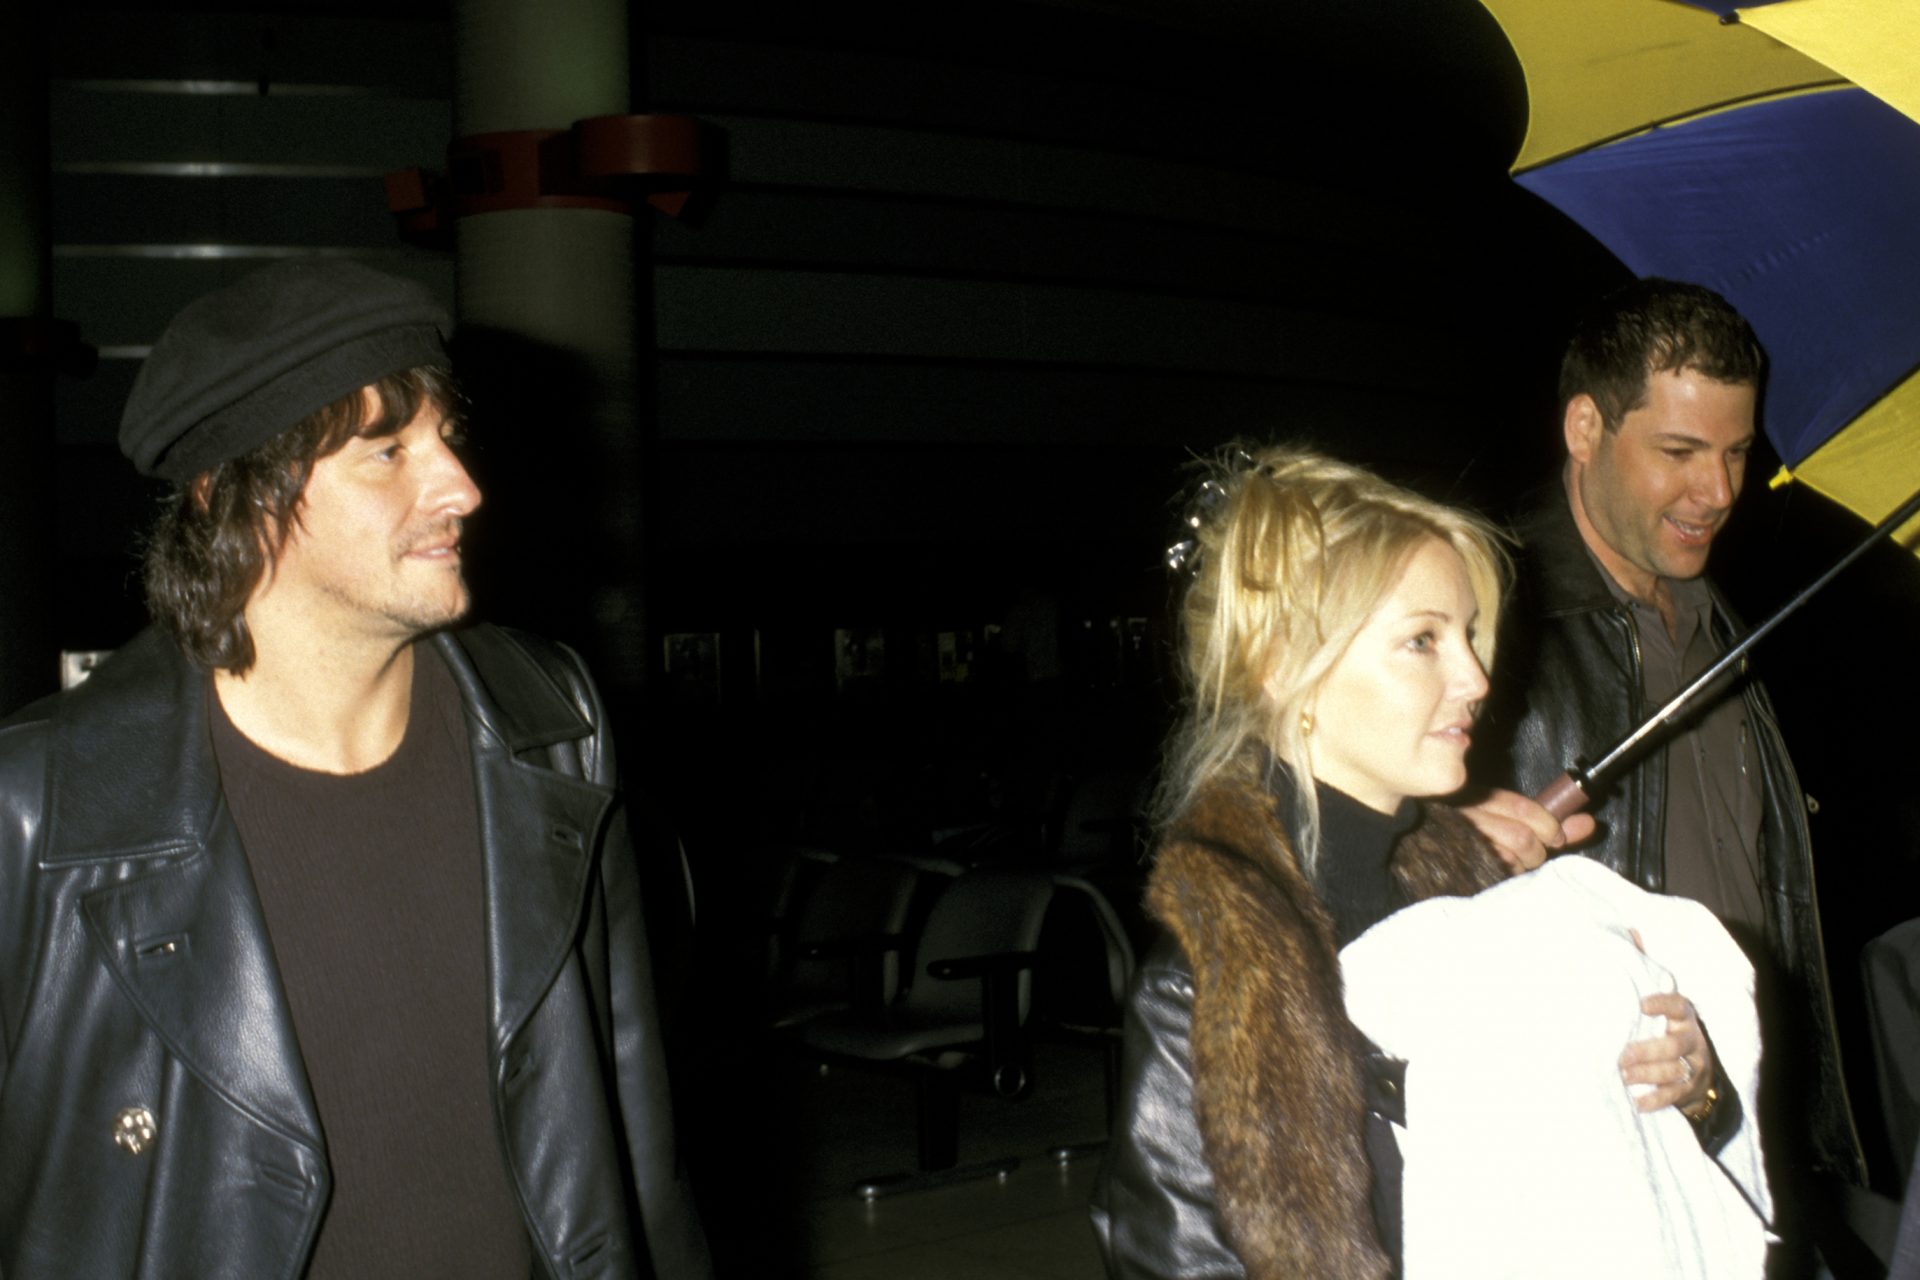 <p class="p1">Heather Locklear and Richie Sambora married in 1994, welcoming their only child, Ava, on October 4, 1997.</p>